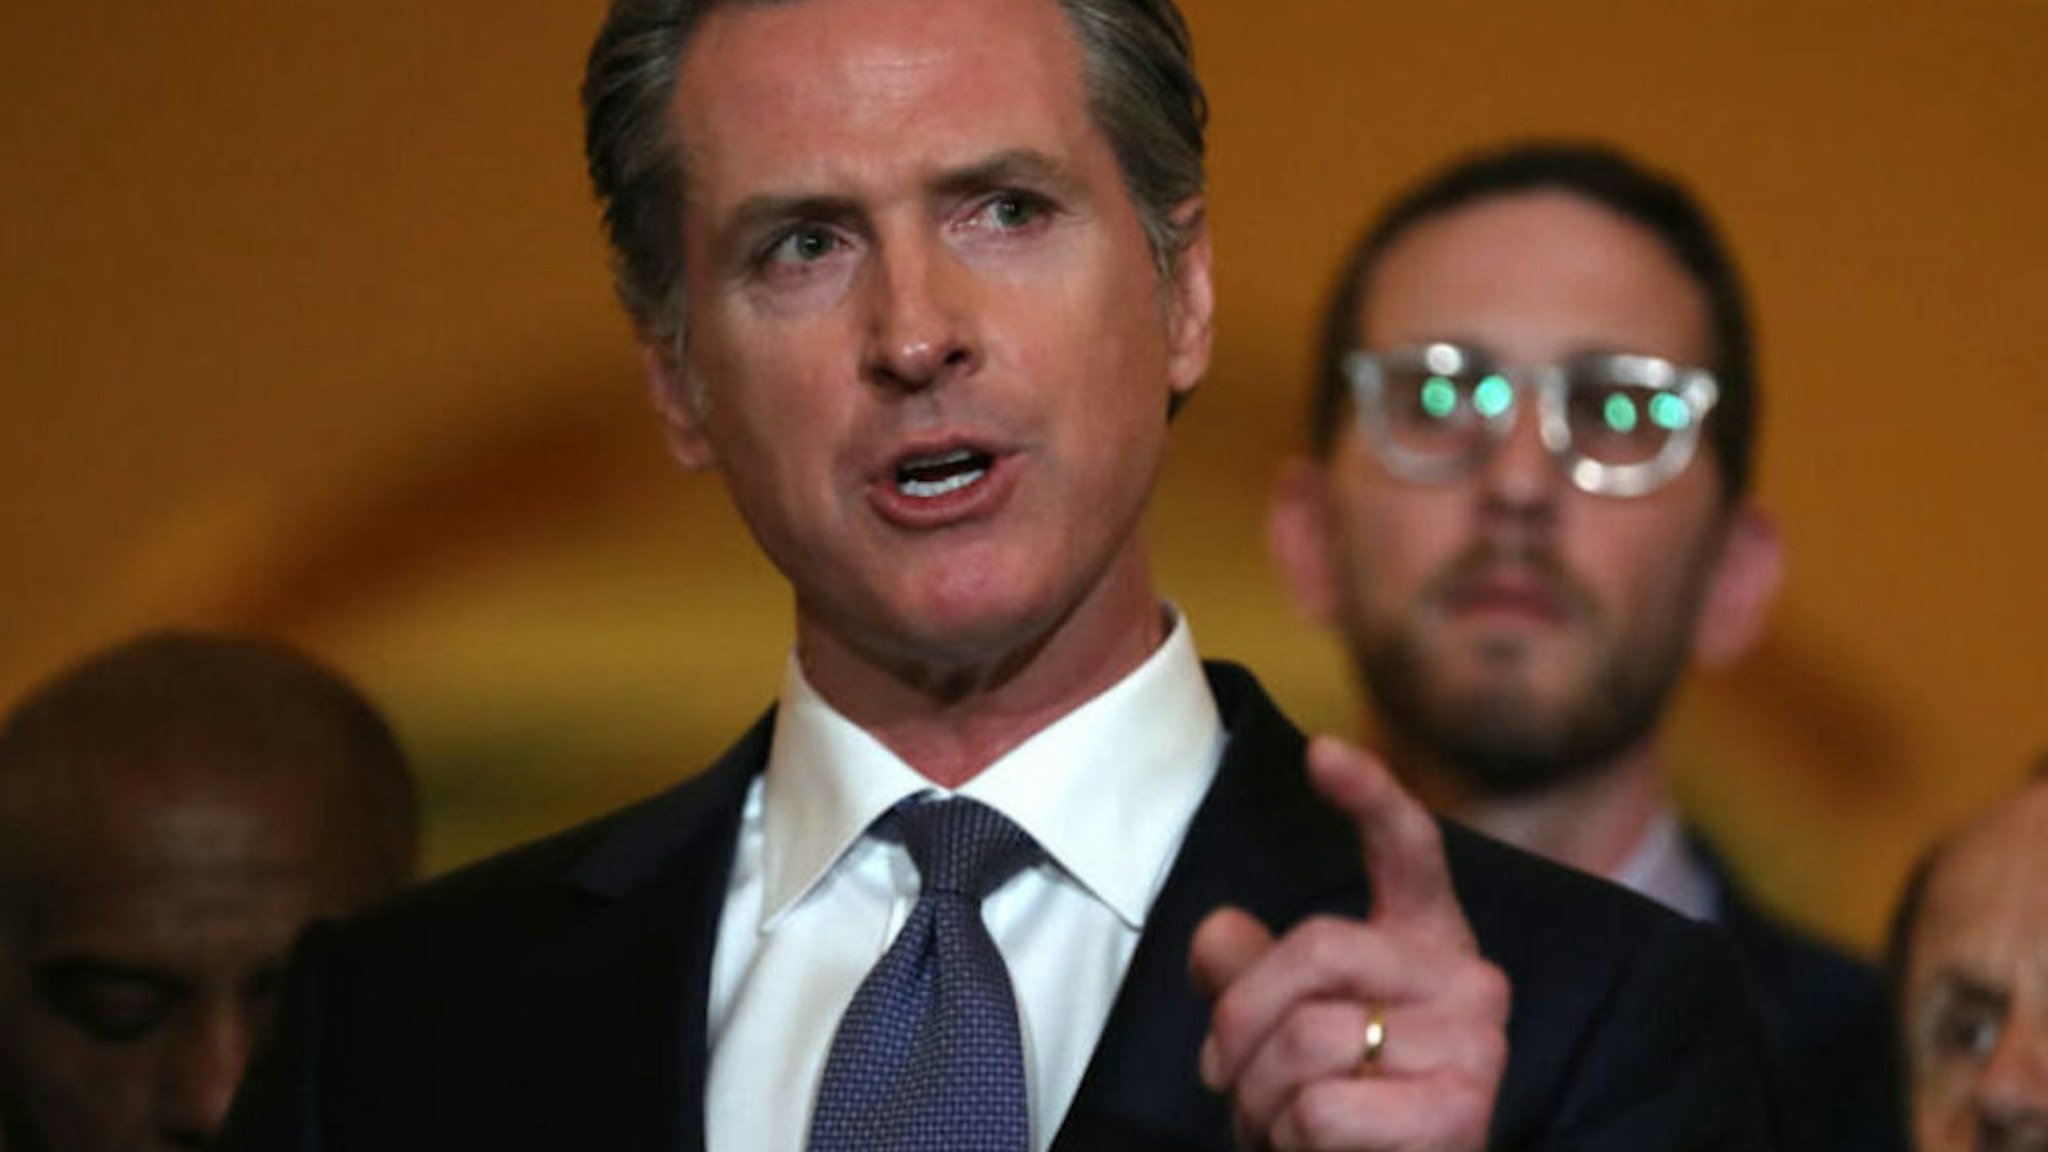 SACRAMENTO, CALIFORNIA - MARCH 13: California Gov. Gavin Newsom speaks during a news conference at the California State Capitol on March 13, 2019 in Sacramento, California. Newsom announced today a moratorium on California's death penalty. California has 737 people on death row, the largest death row population in the United States.